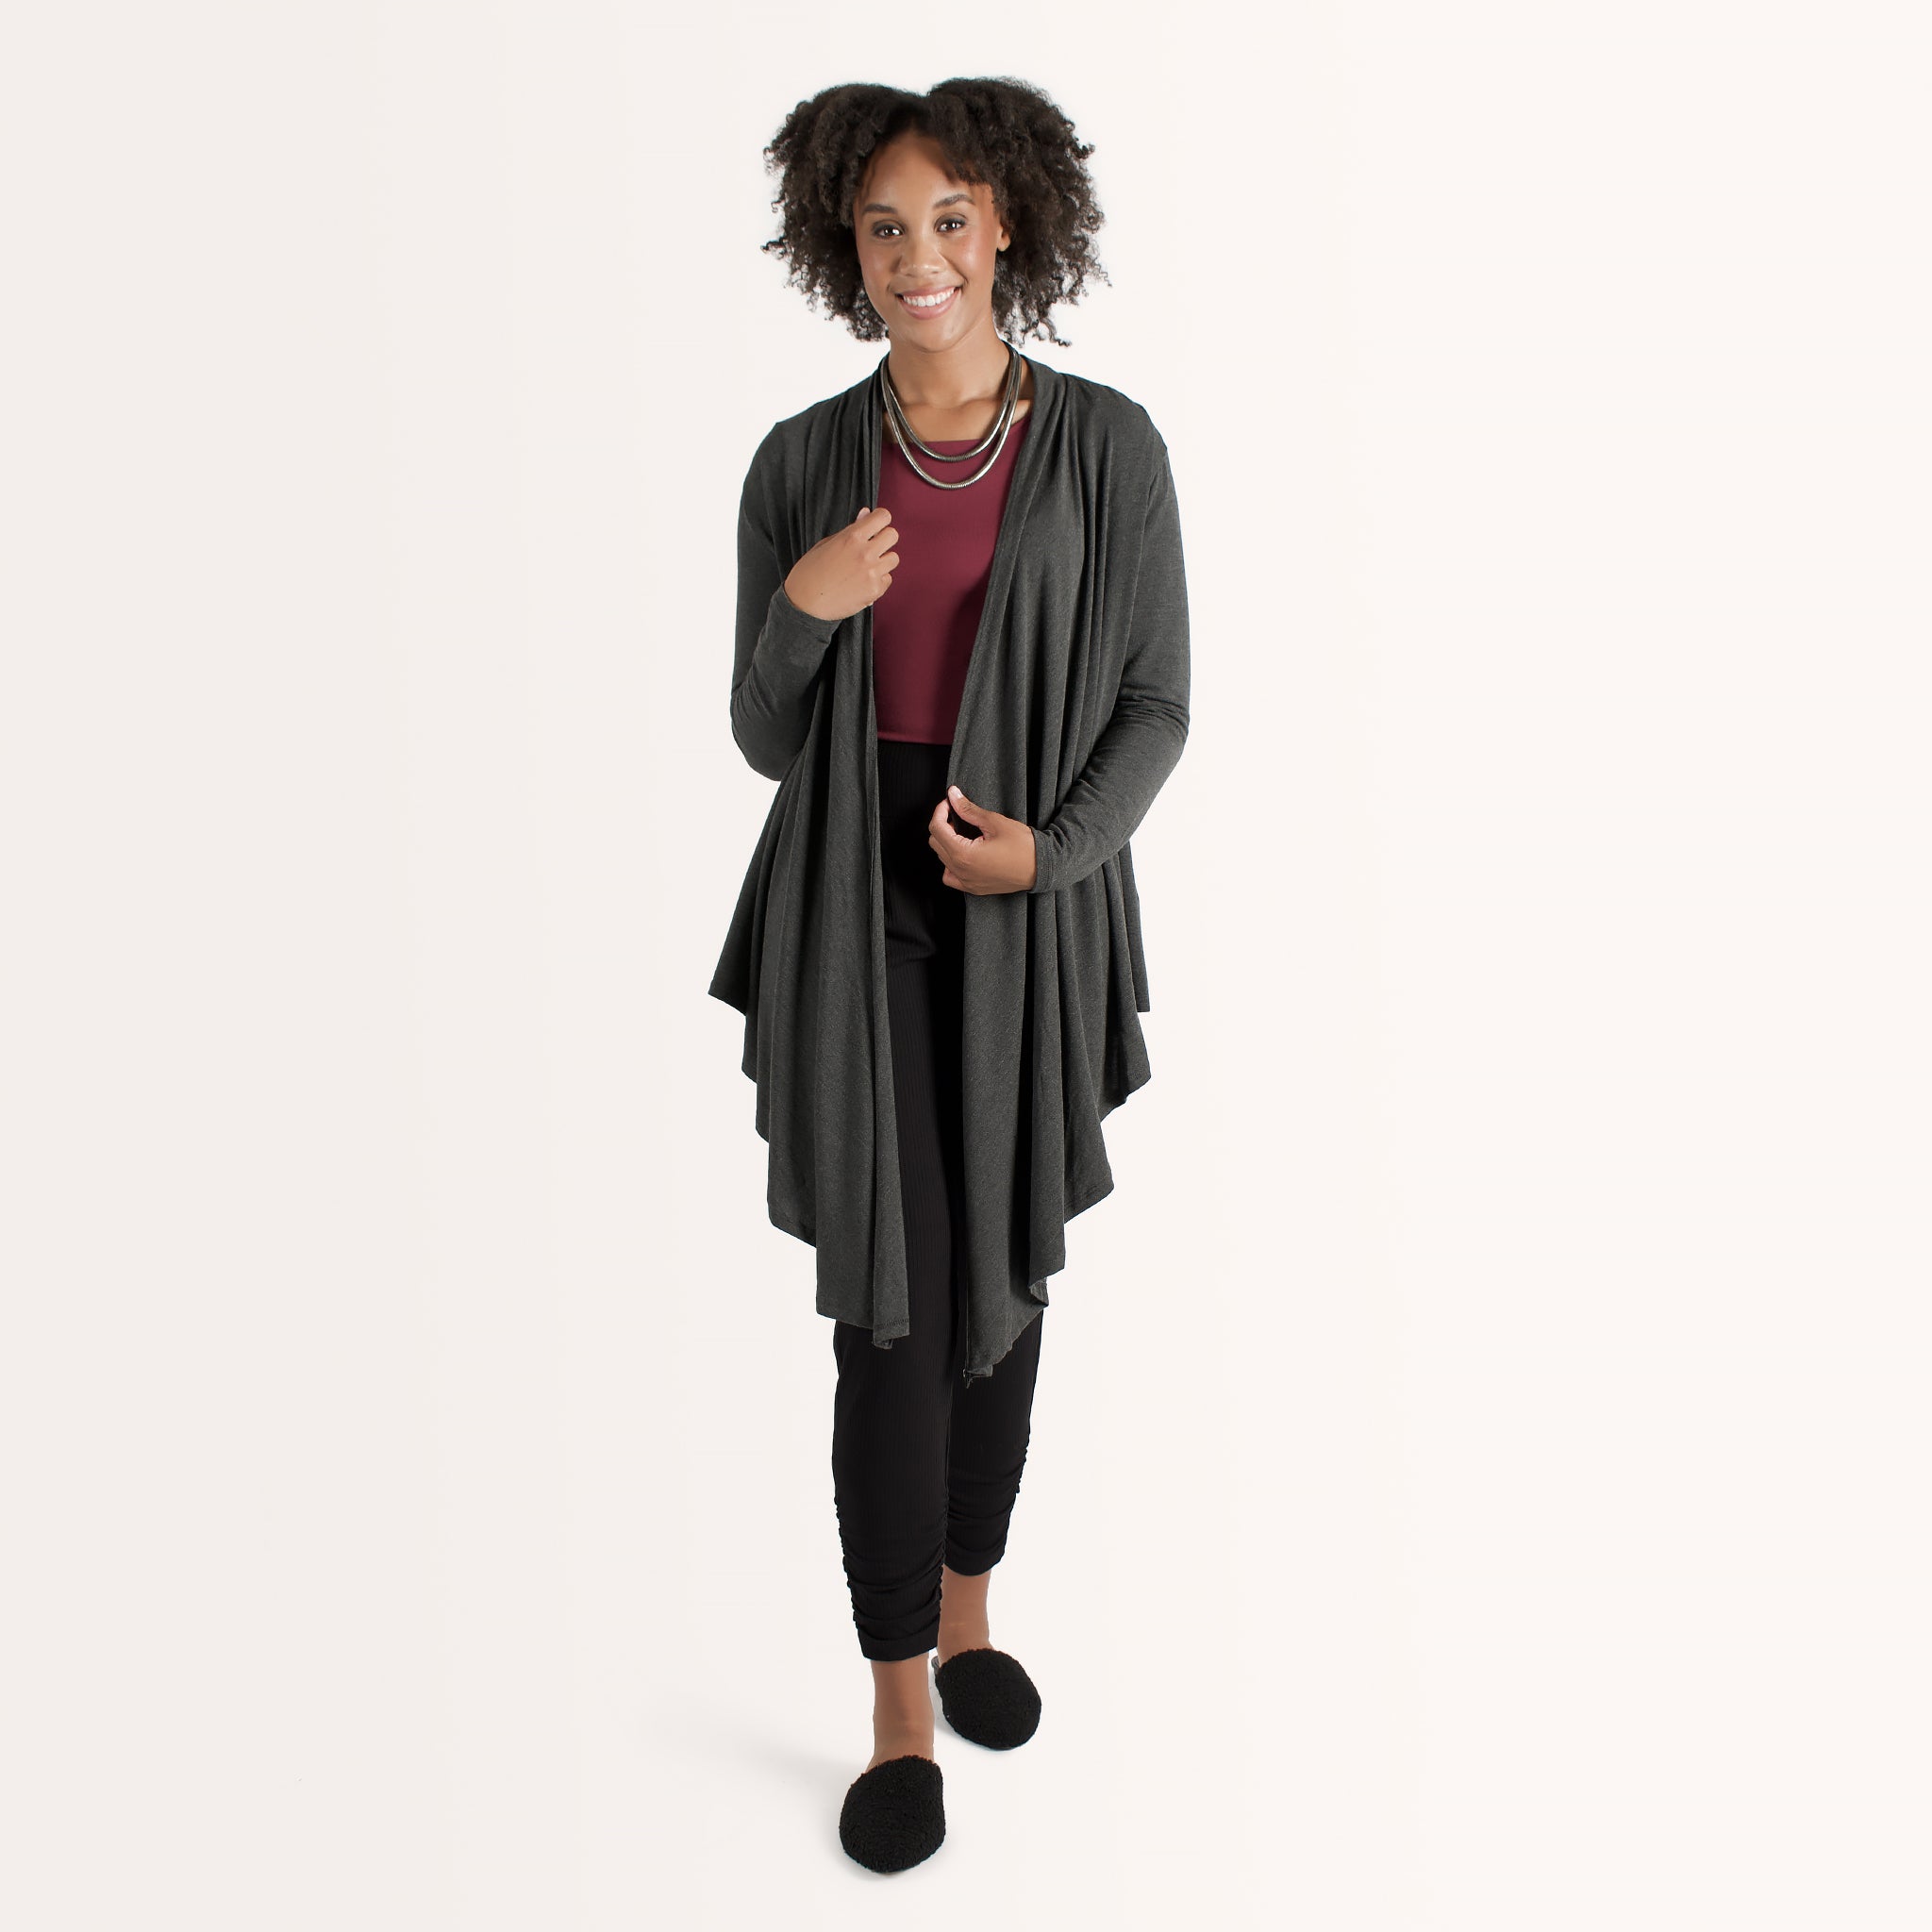 Woman wearing long sleeve dark grey cardigan with red scoop neckline shirt and black fitted pants